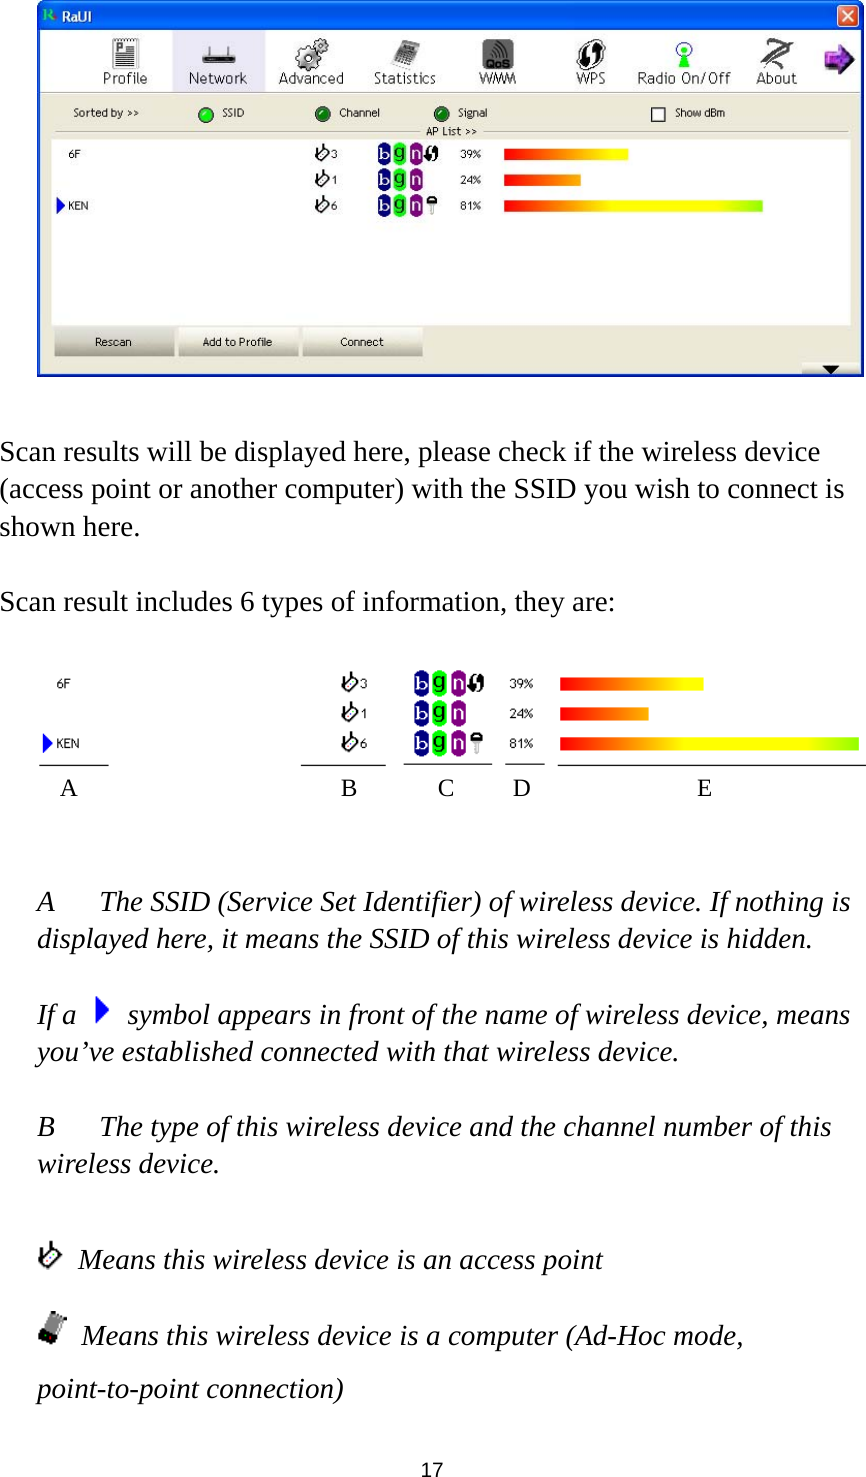  17   Scan results will be displayed here, please check if the wireless device (access point or another computer) with the SSID you wish to connect is shown here.  Scan result includes 6 types of information, they are:     A  The SSID (Service Set Identifier) of wireless device. If nothing is displayed here, it means the SSID of this wireless device is hidden.  If a    symbol appears in front of the name of wireless device, means you’ve established connected with that wireless device.  B  The type of this wireless device and the channel number of this wireless device.      Means this wireless device is an access point  Means this wireless device is a computer (Ad-Hoc mode, point-to-point connection) A B C D E 